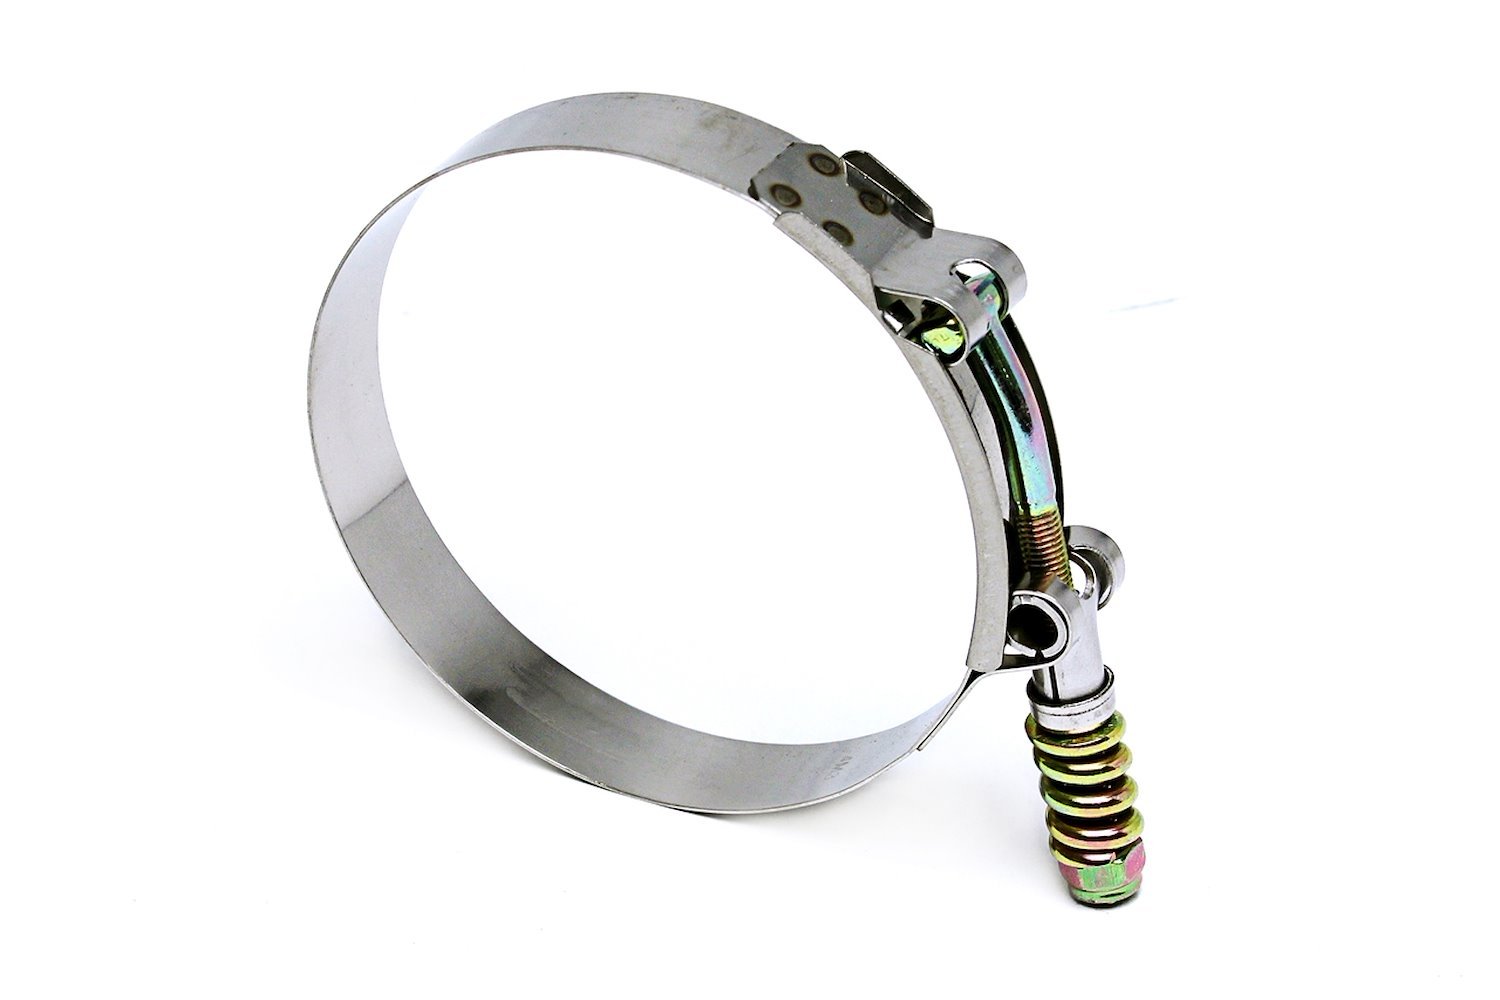 SLTC-325 Stainless Steel Spring Loaded T-Bolt Hose Clamp, Size #76, Range: 3.27 in.-3.58 in.